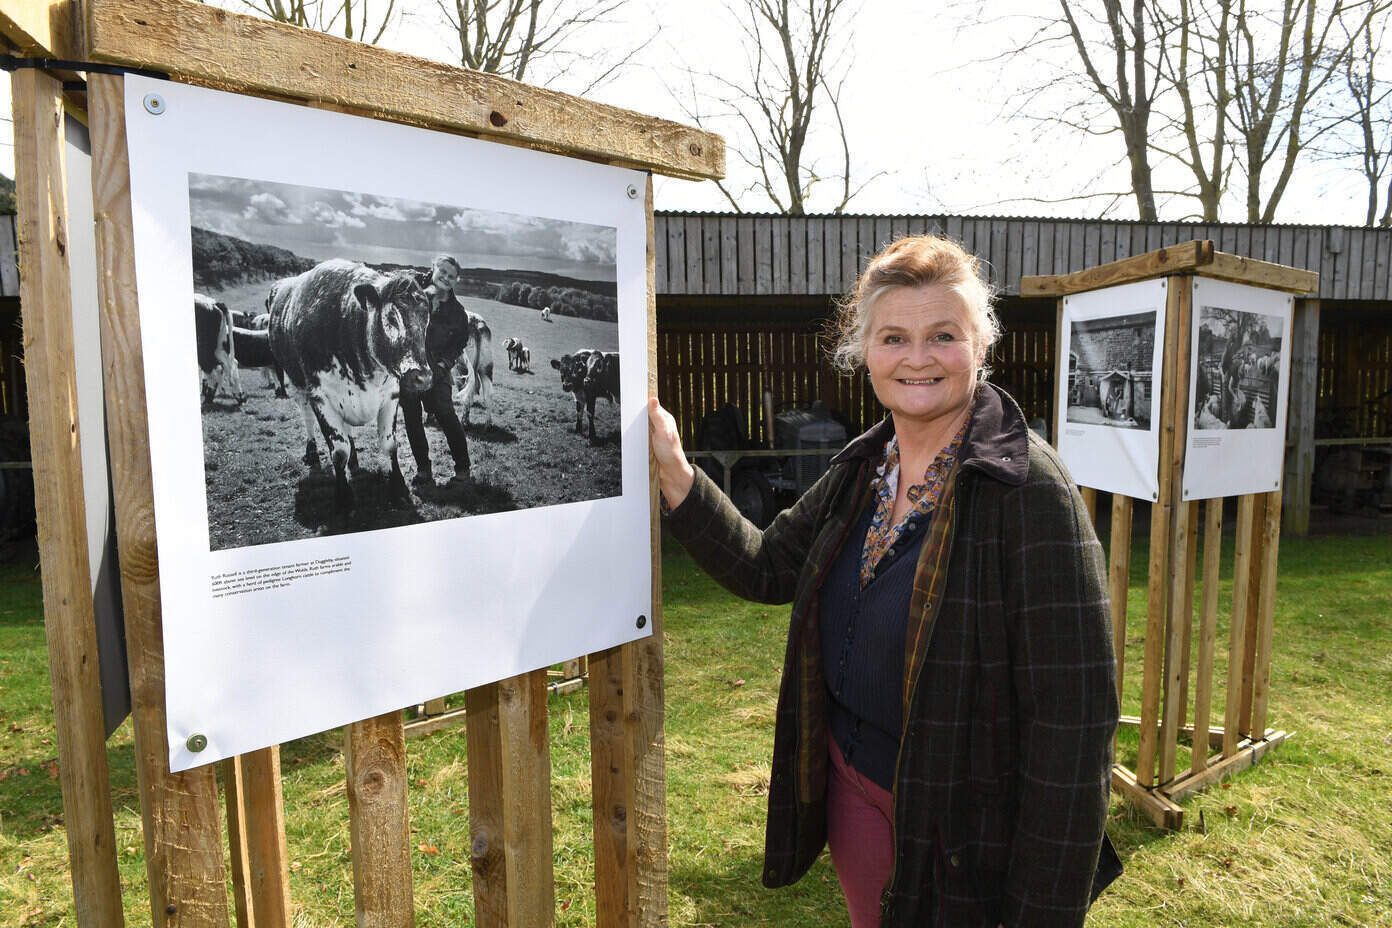 Farmer Ruth Russell alongside her photograph captured by Lucy Saggers for the All in a days work exhibition at Ryedale Folk Museum Credit Gerard Binks